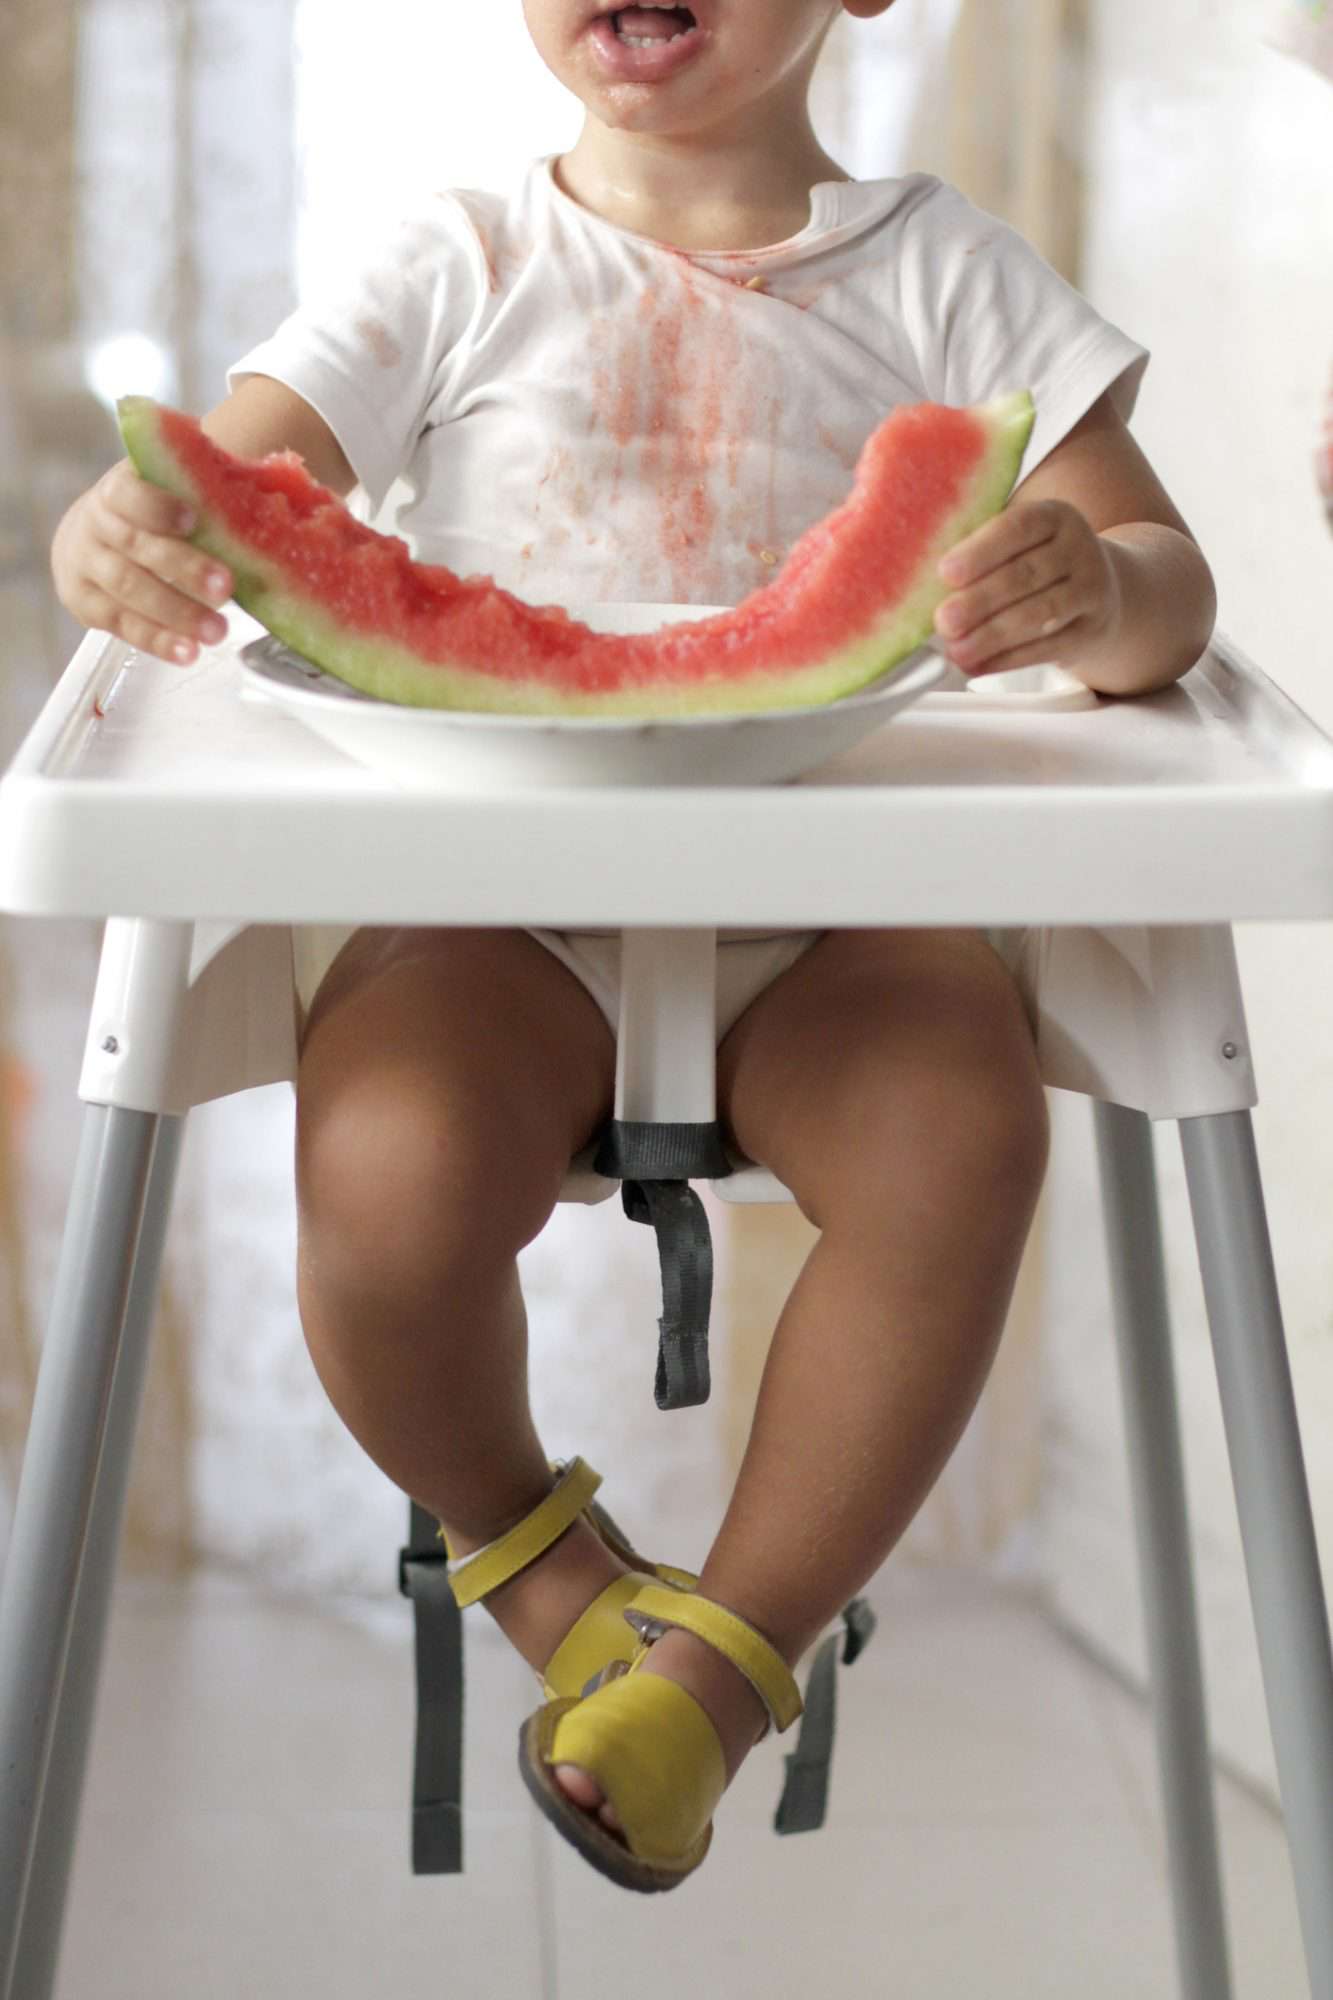 Baby boy eating a slice of watermelon on high chair